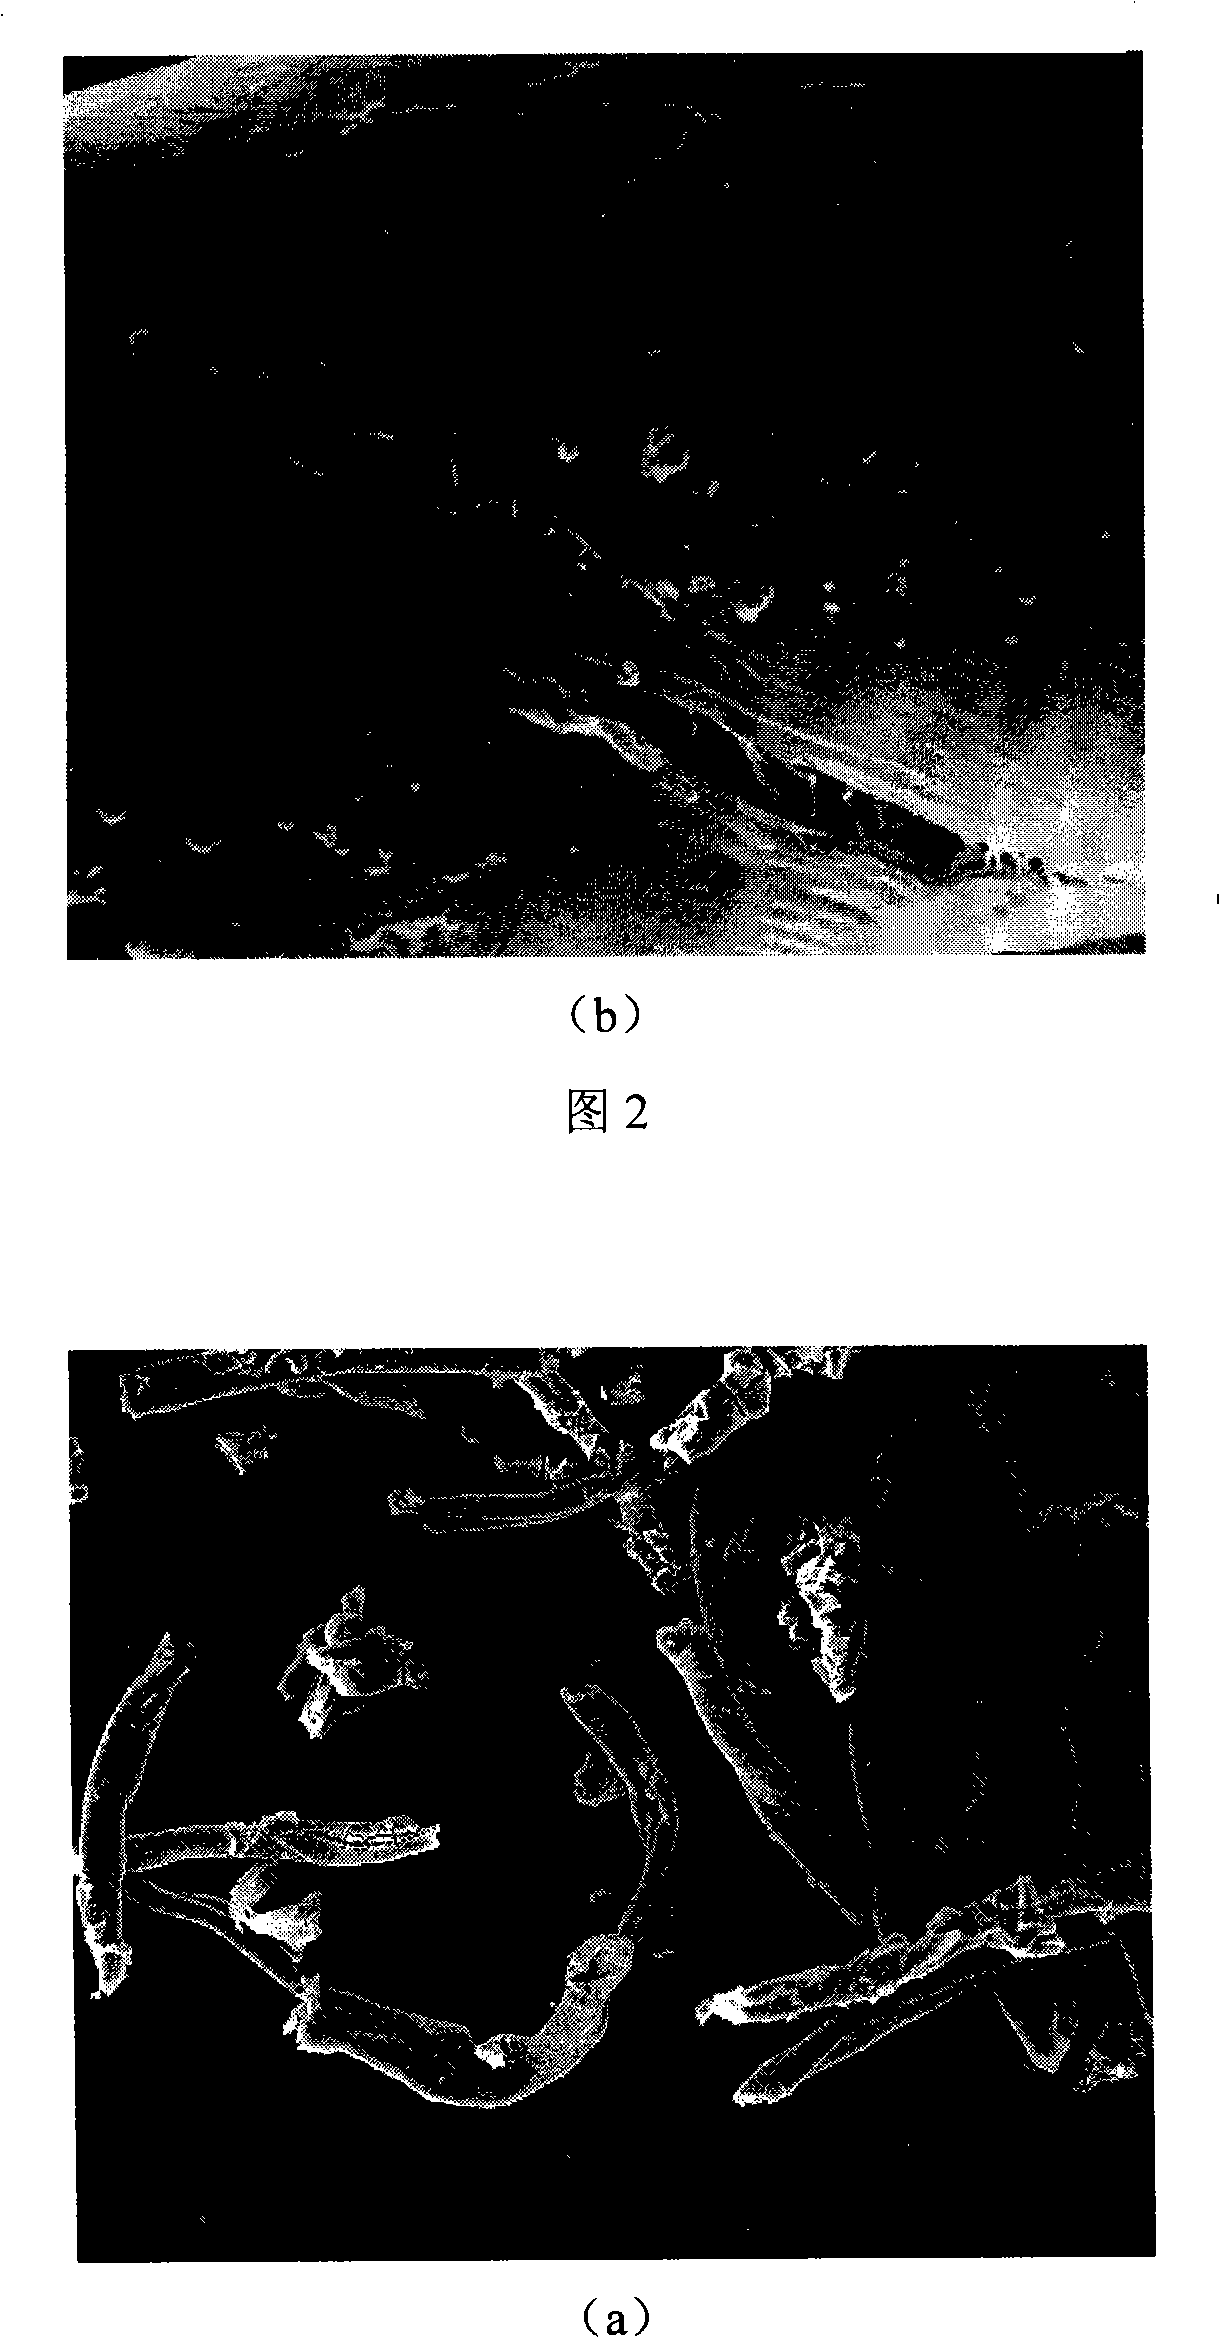 Method for preparing organic or inorganic composite fiber material with supercritical carbonic anhydride